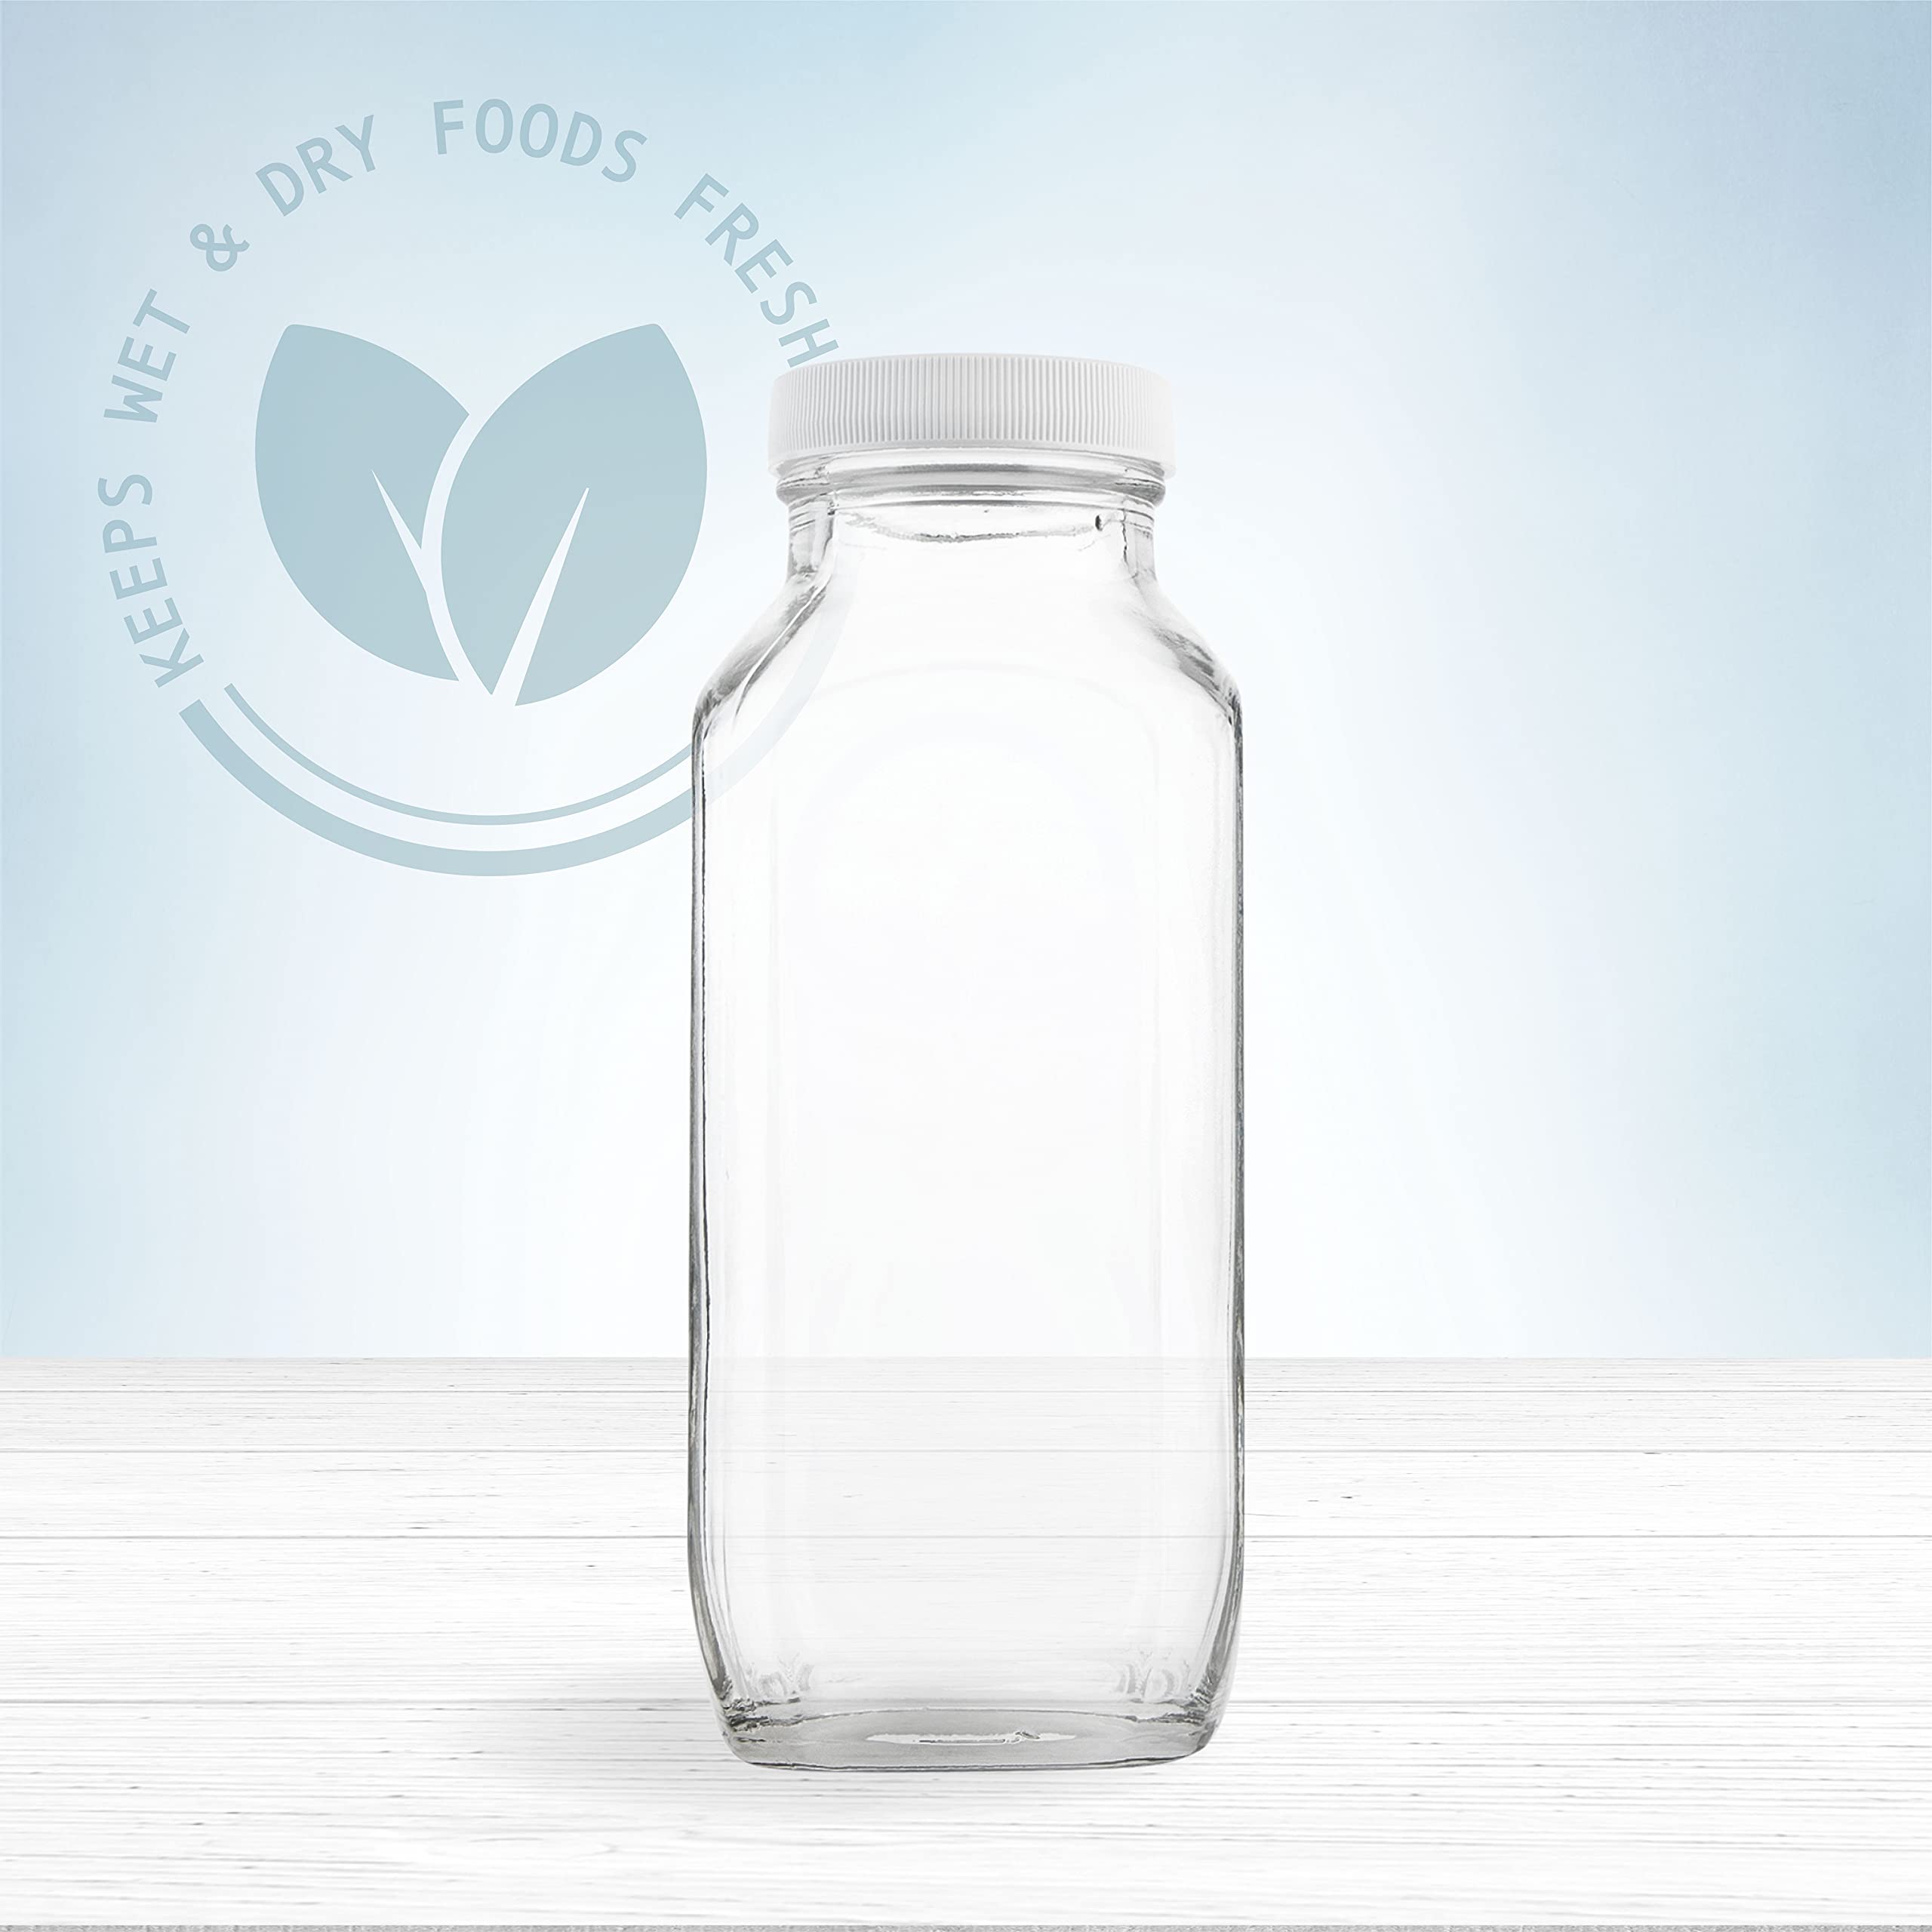 kitchentoolz 16oz Square Glass Milk Bottle with Plastic Airtight Lids - Vintage Reusable Dairy Drinking Jars Containers for Milk, Yogurt, Smoothies, Kefir, Kombucha, and Water- Pack of 2  - Very Good